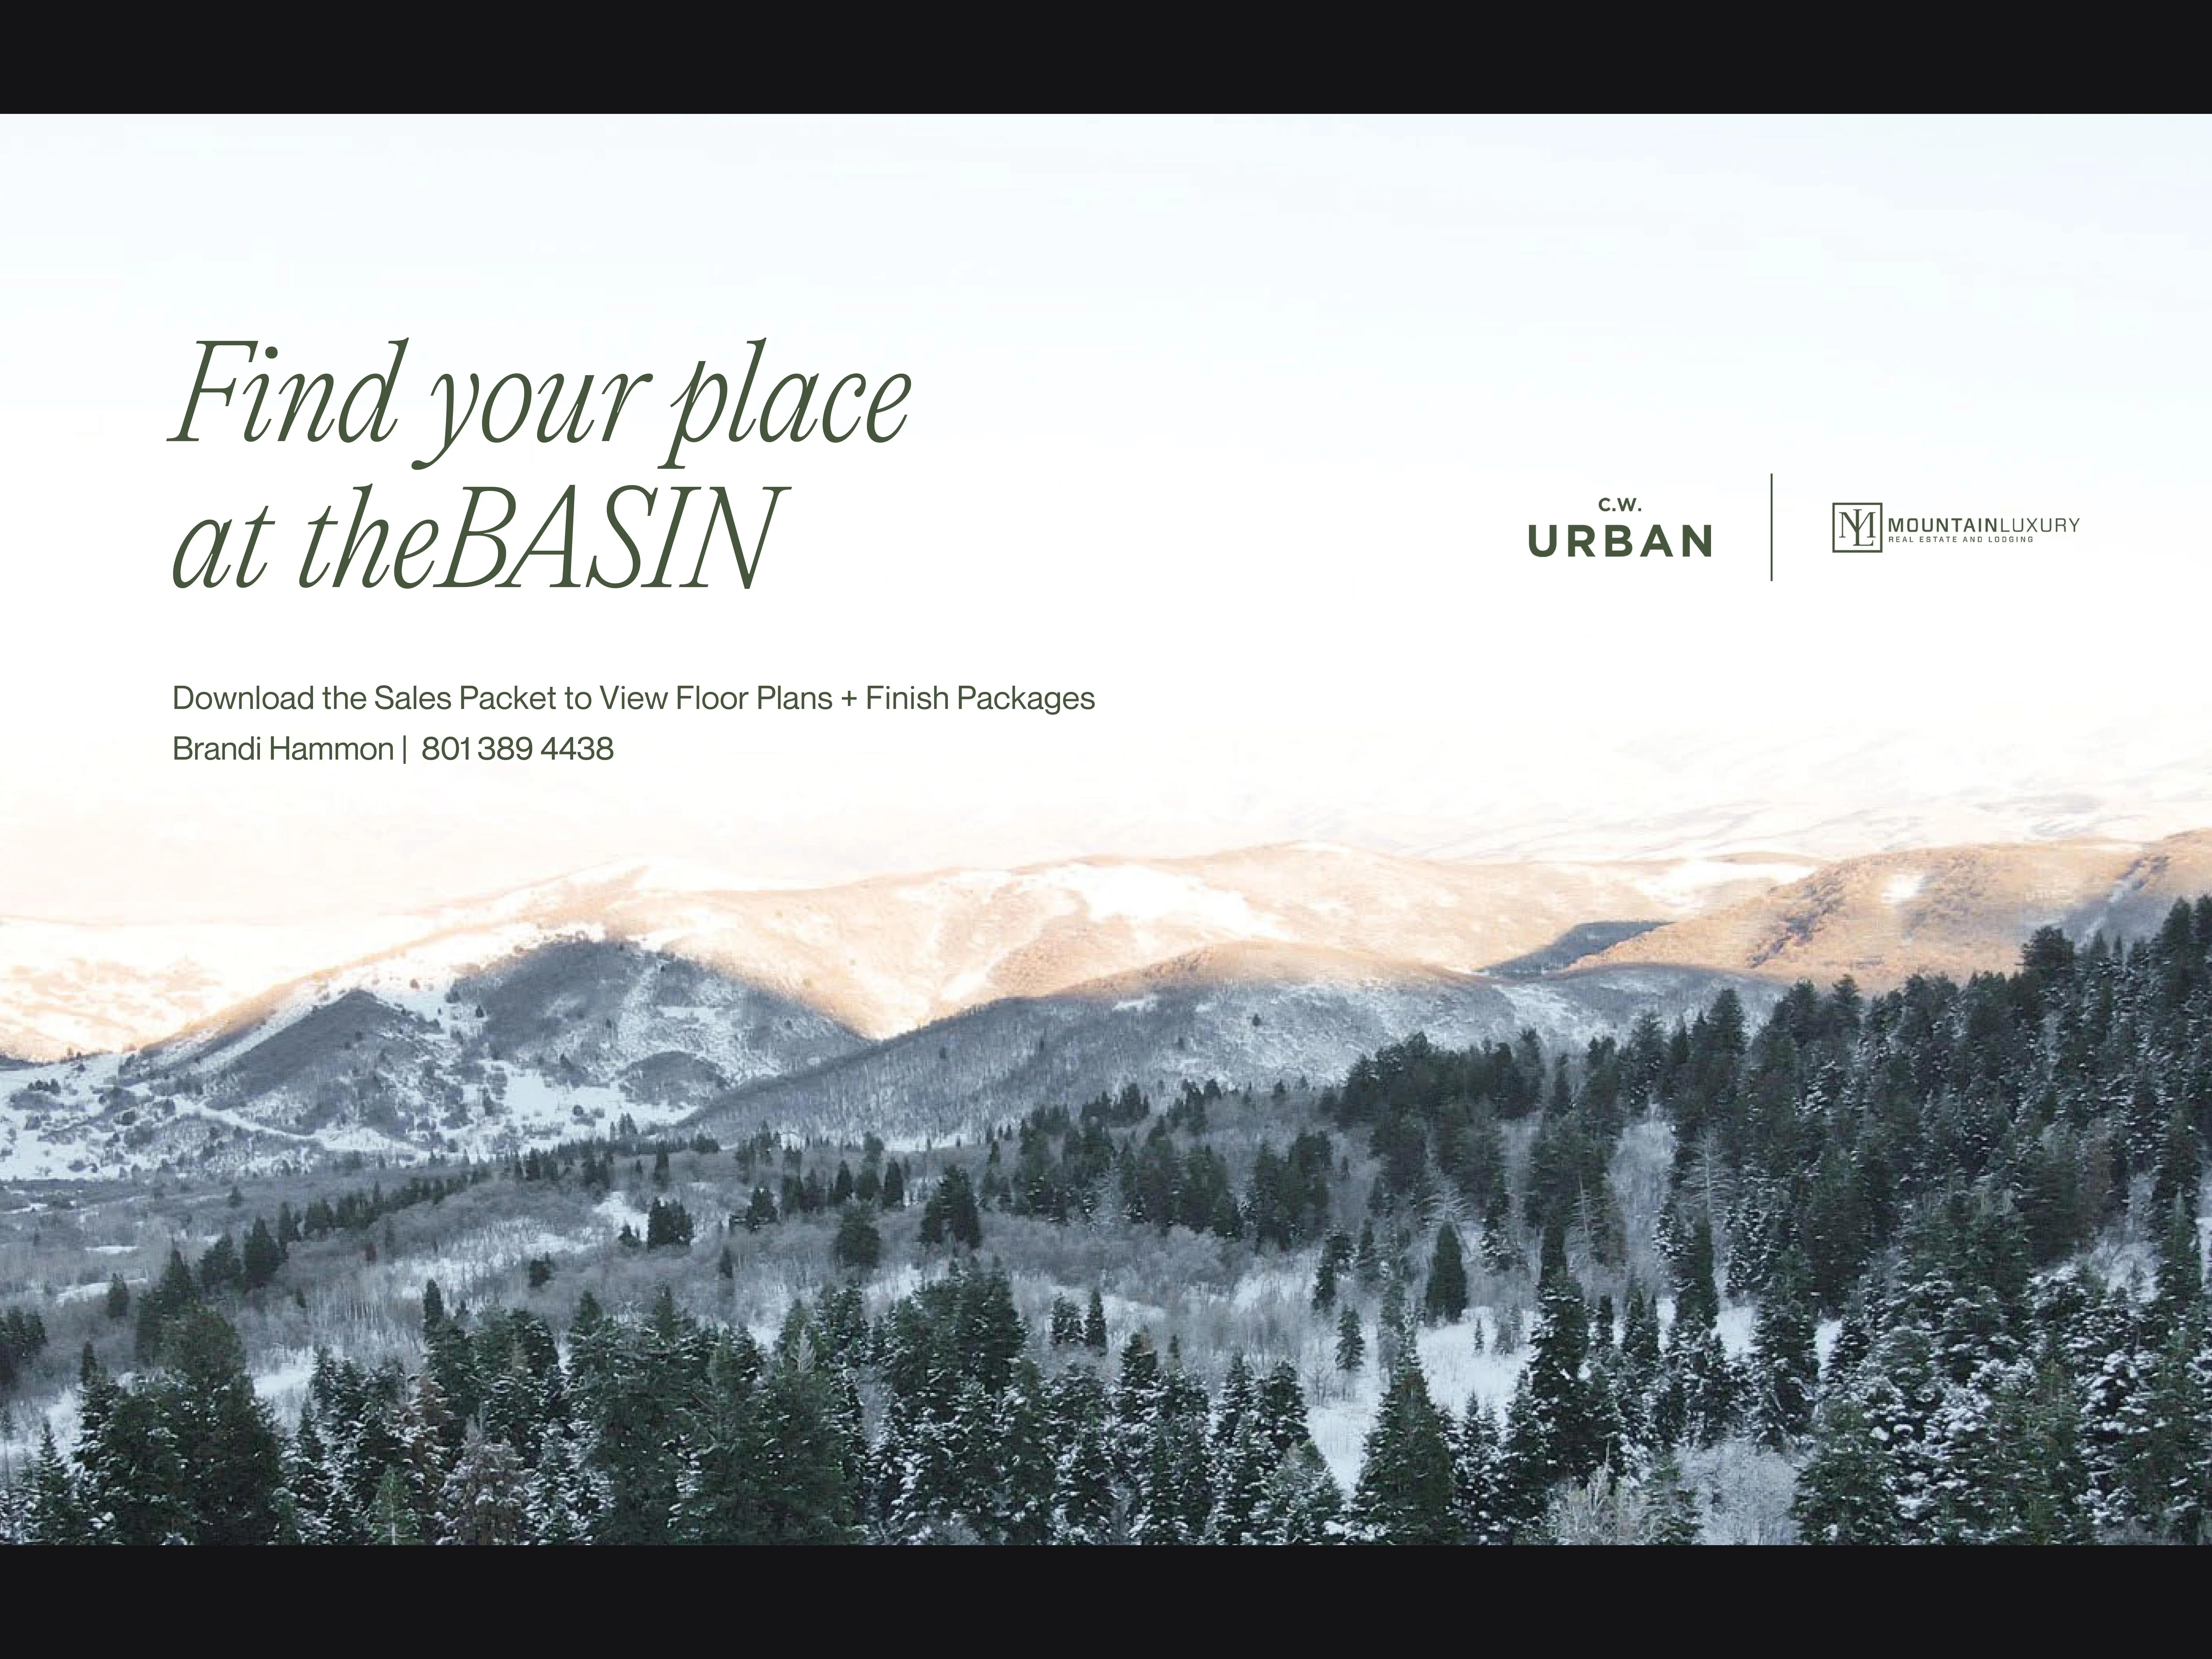 Find your place at theBasin.